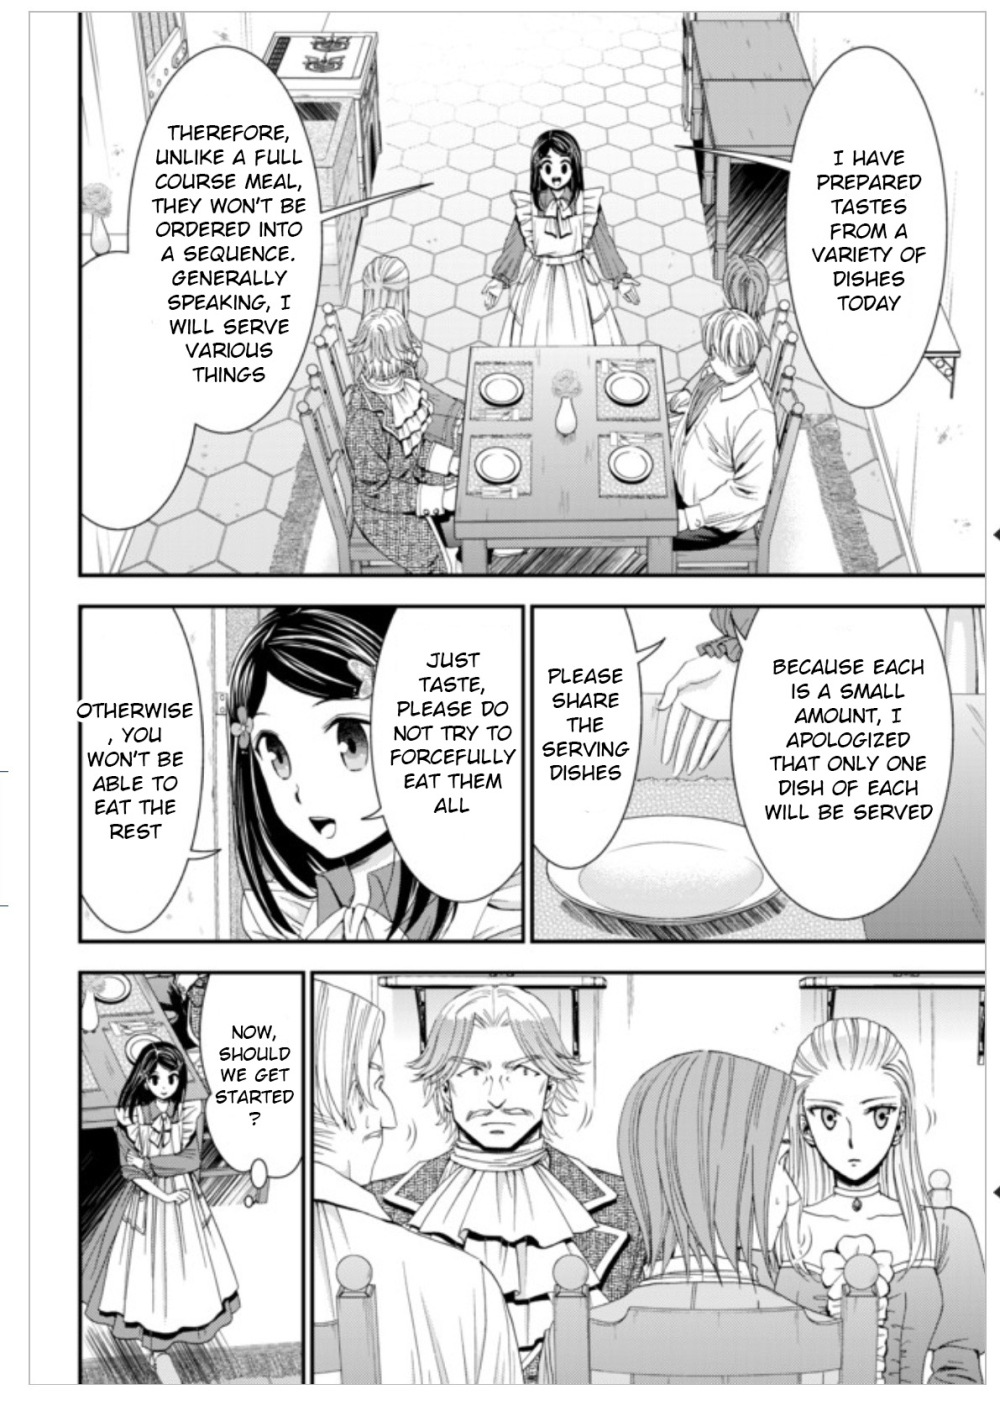 Saving 80,000 Gold Coins in the Different World for My Old Age Vol. 2 Ch. 13